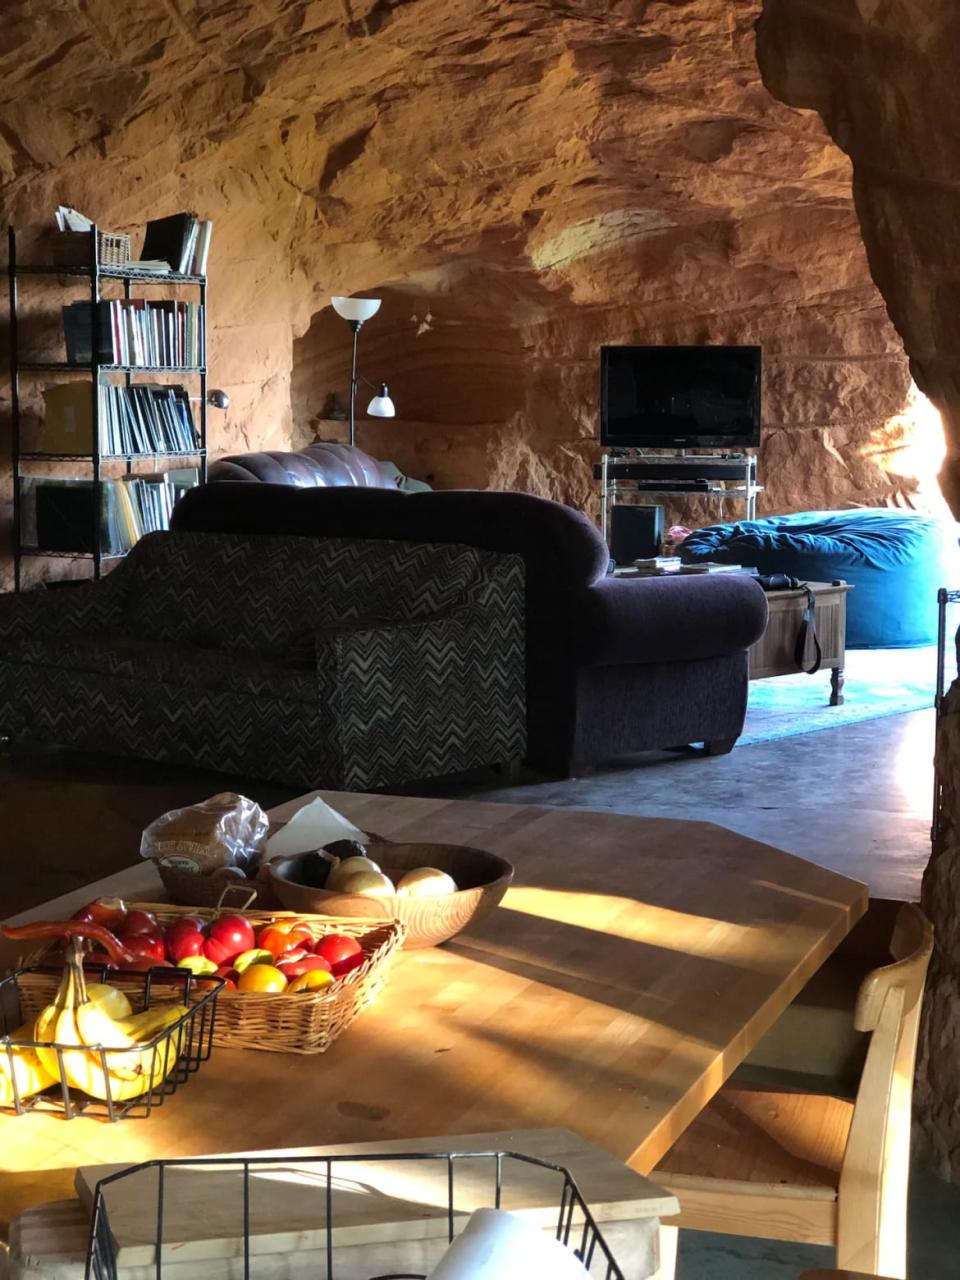 <div class="inline-image__credit">Courtesy Airbnb</div>